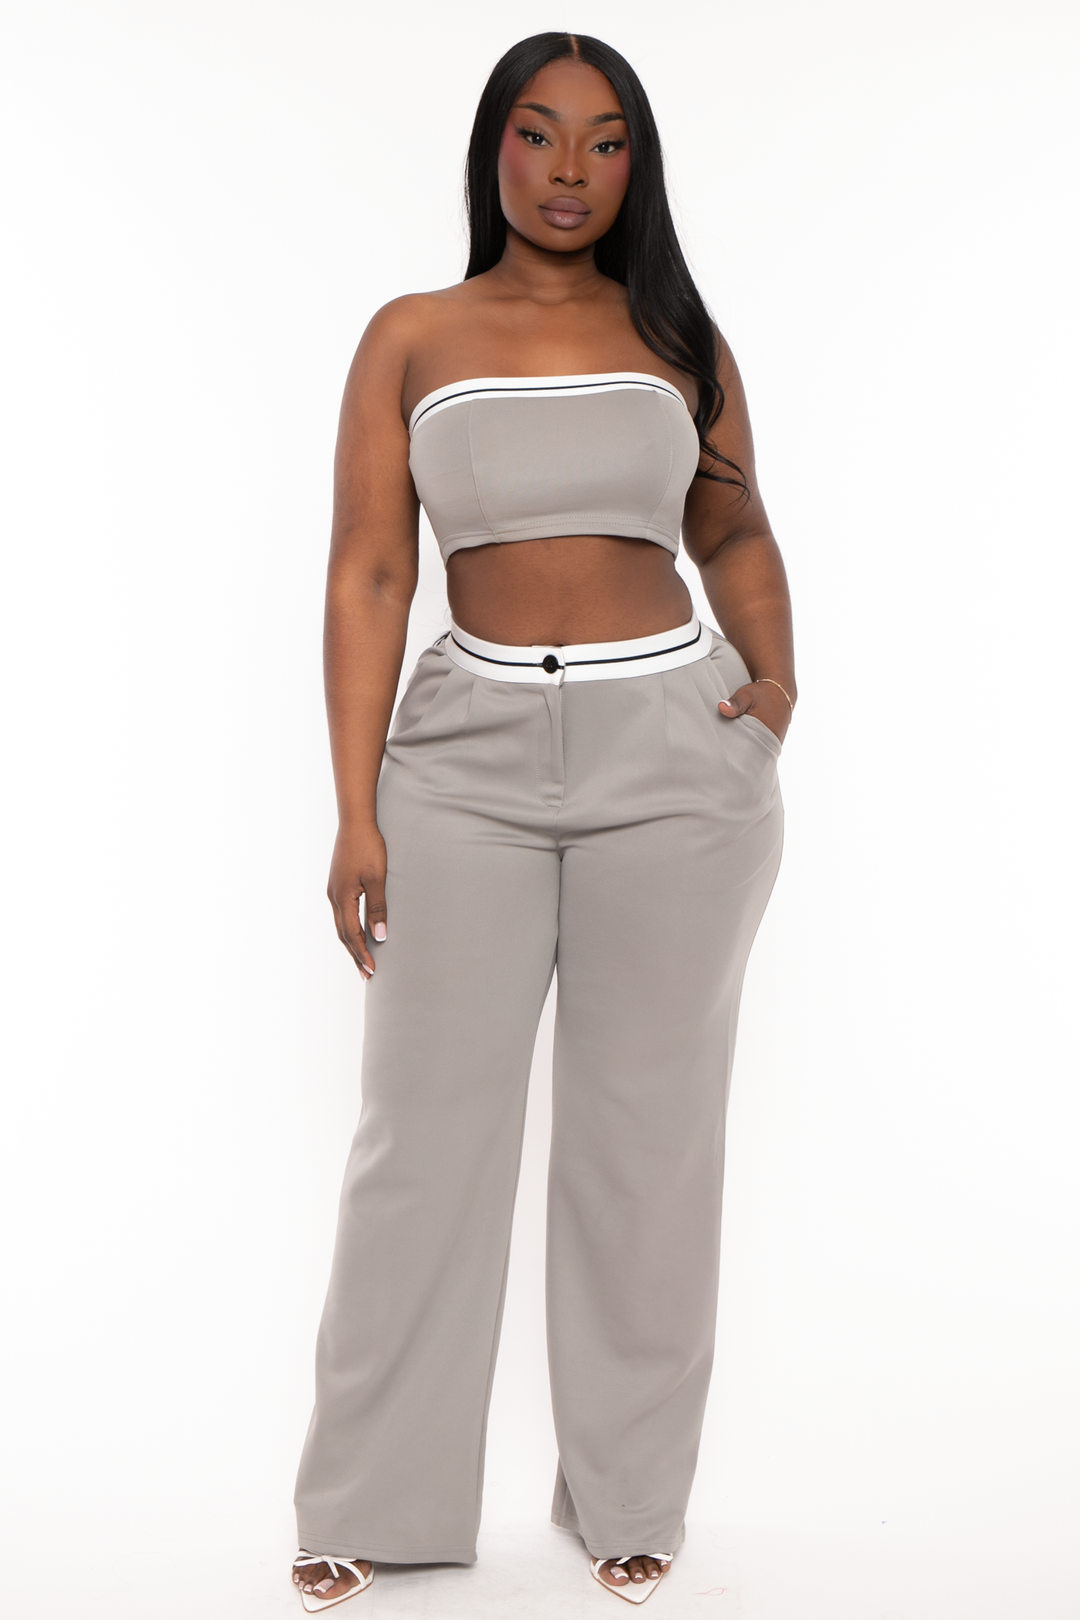 CHICCTHY TOP Matching Sets 1X / Grey Plus Size Parisa Sporty  Matching Set-Grey